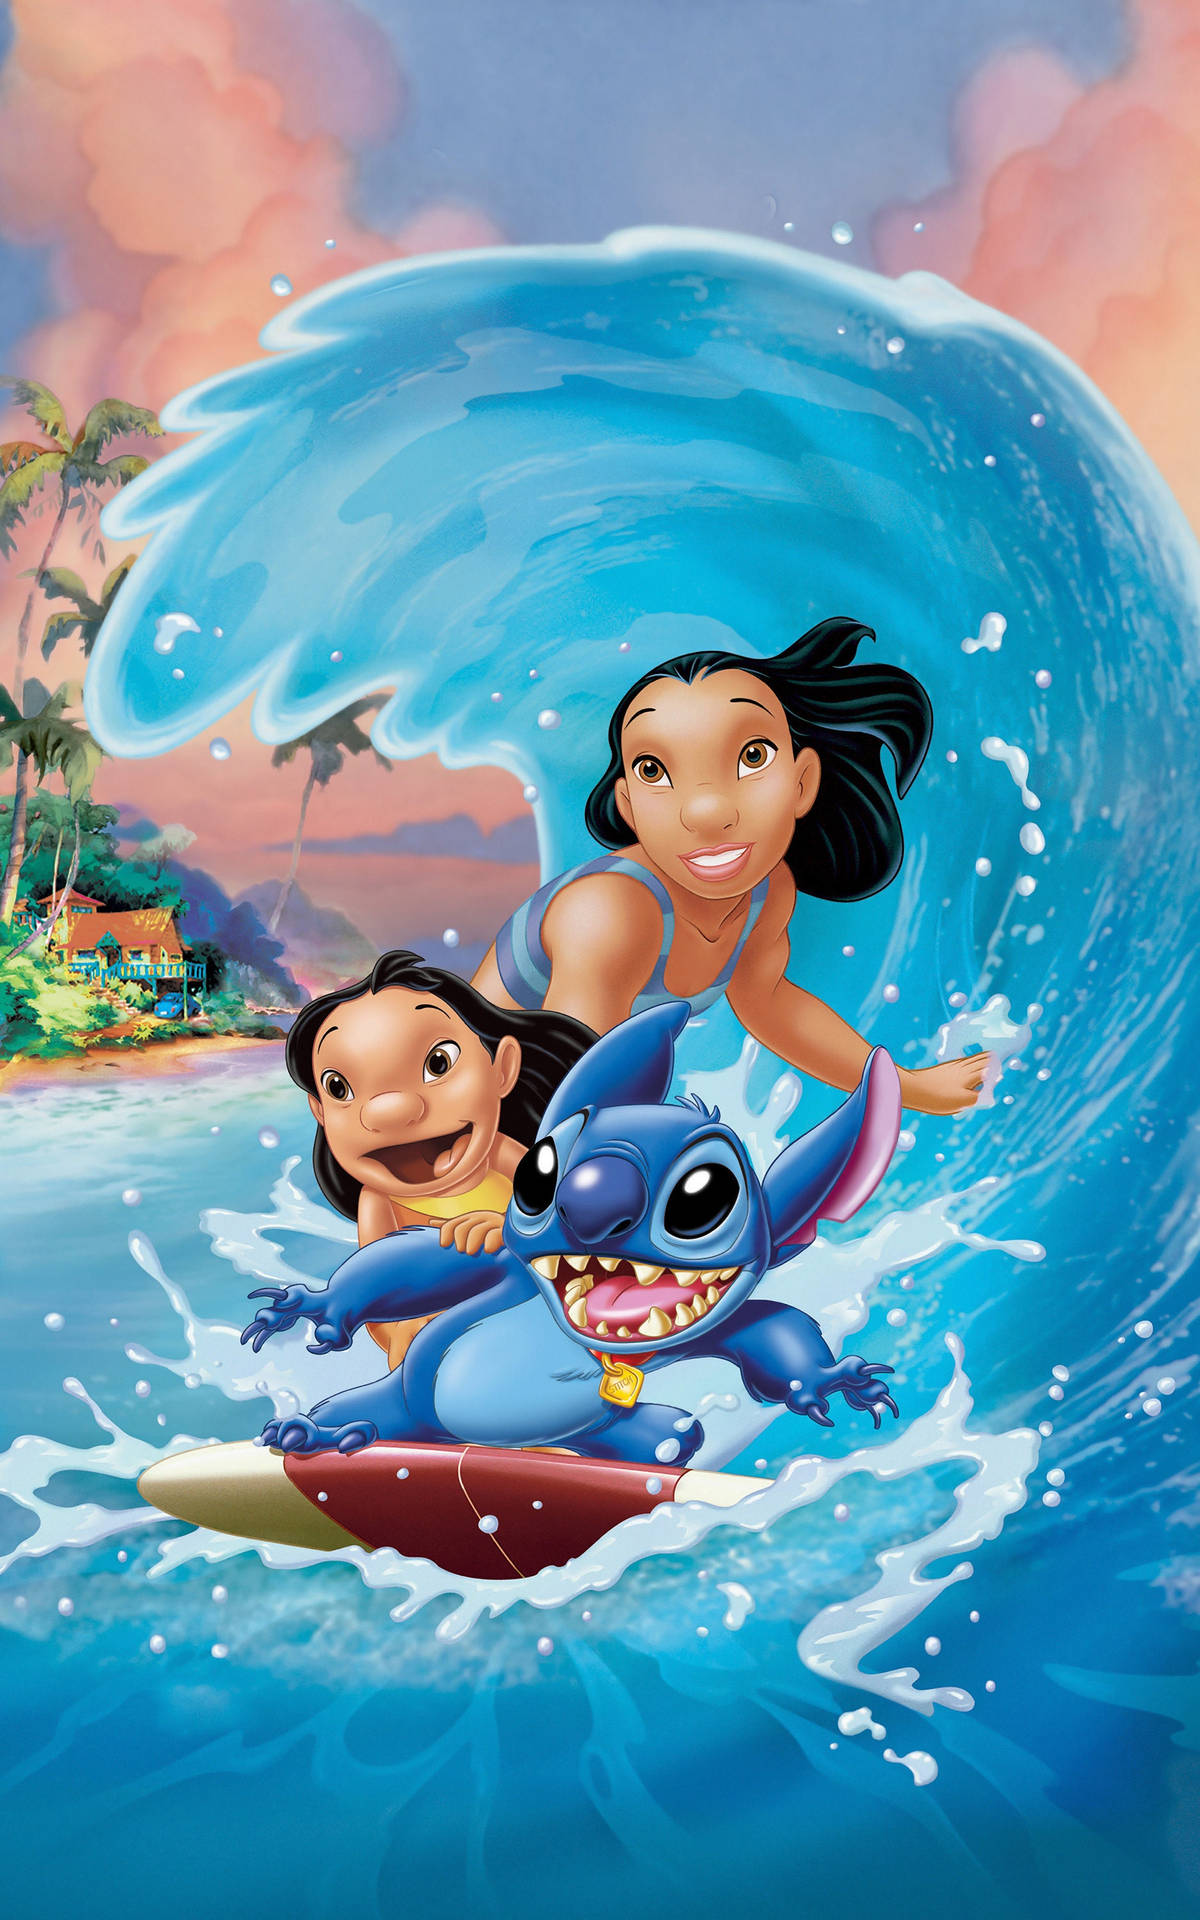 Download Adorable 3d Render Of Character Stitch From Disney's Lilo And ...